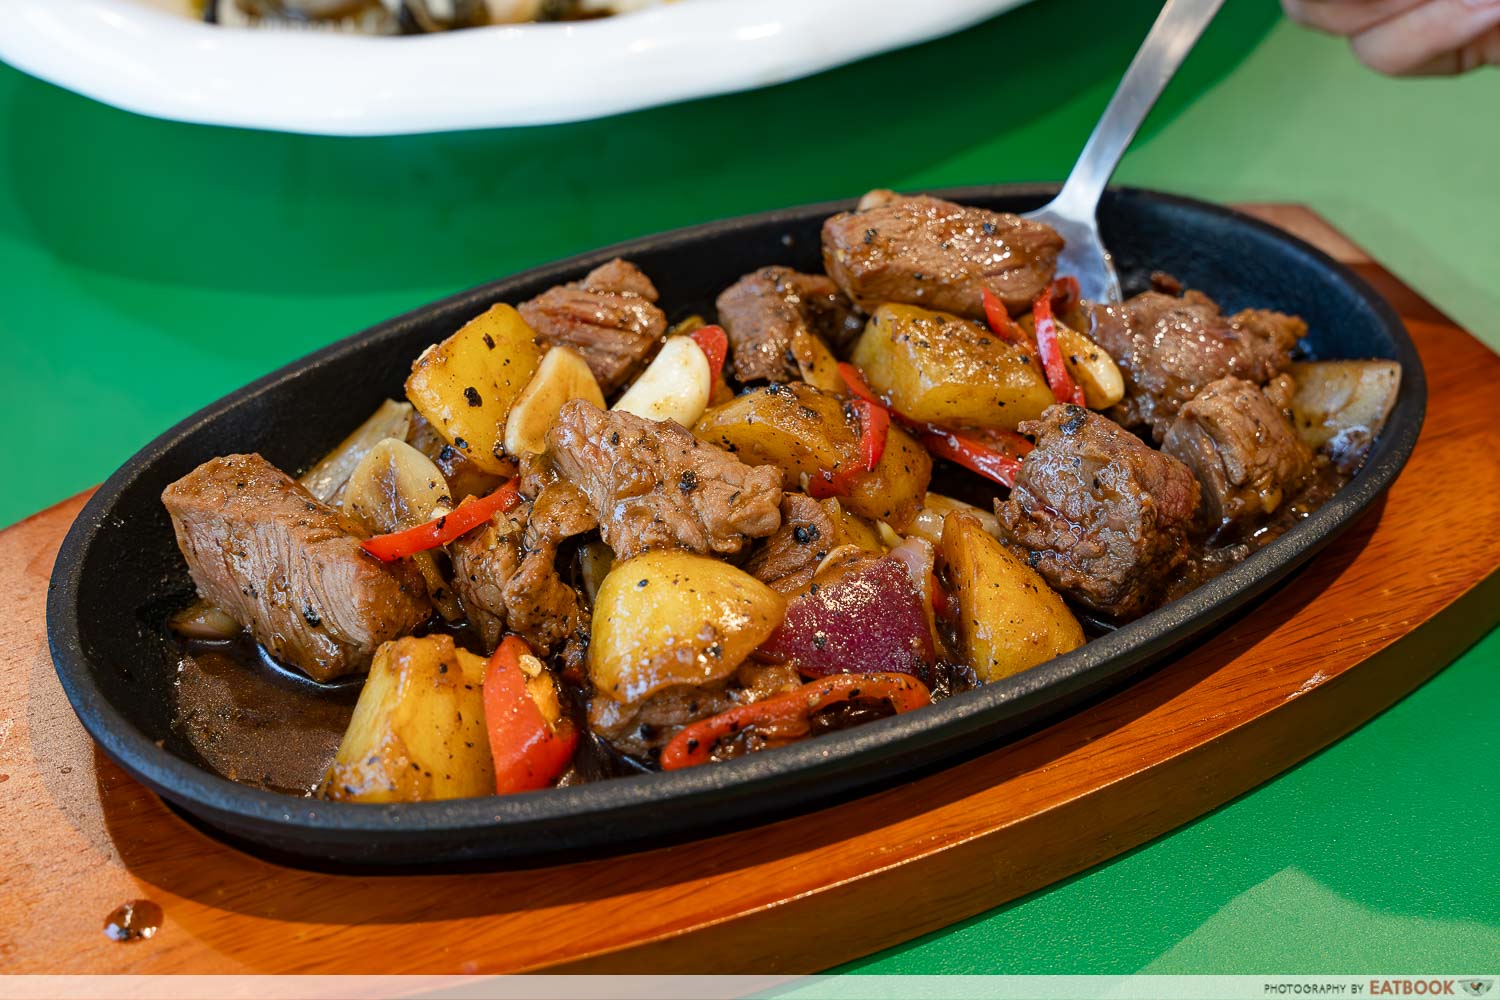 hey kee - pan fried beef tenderloin cubes with potatoes intro